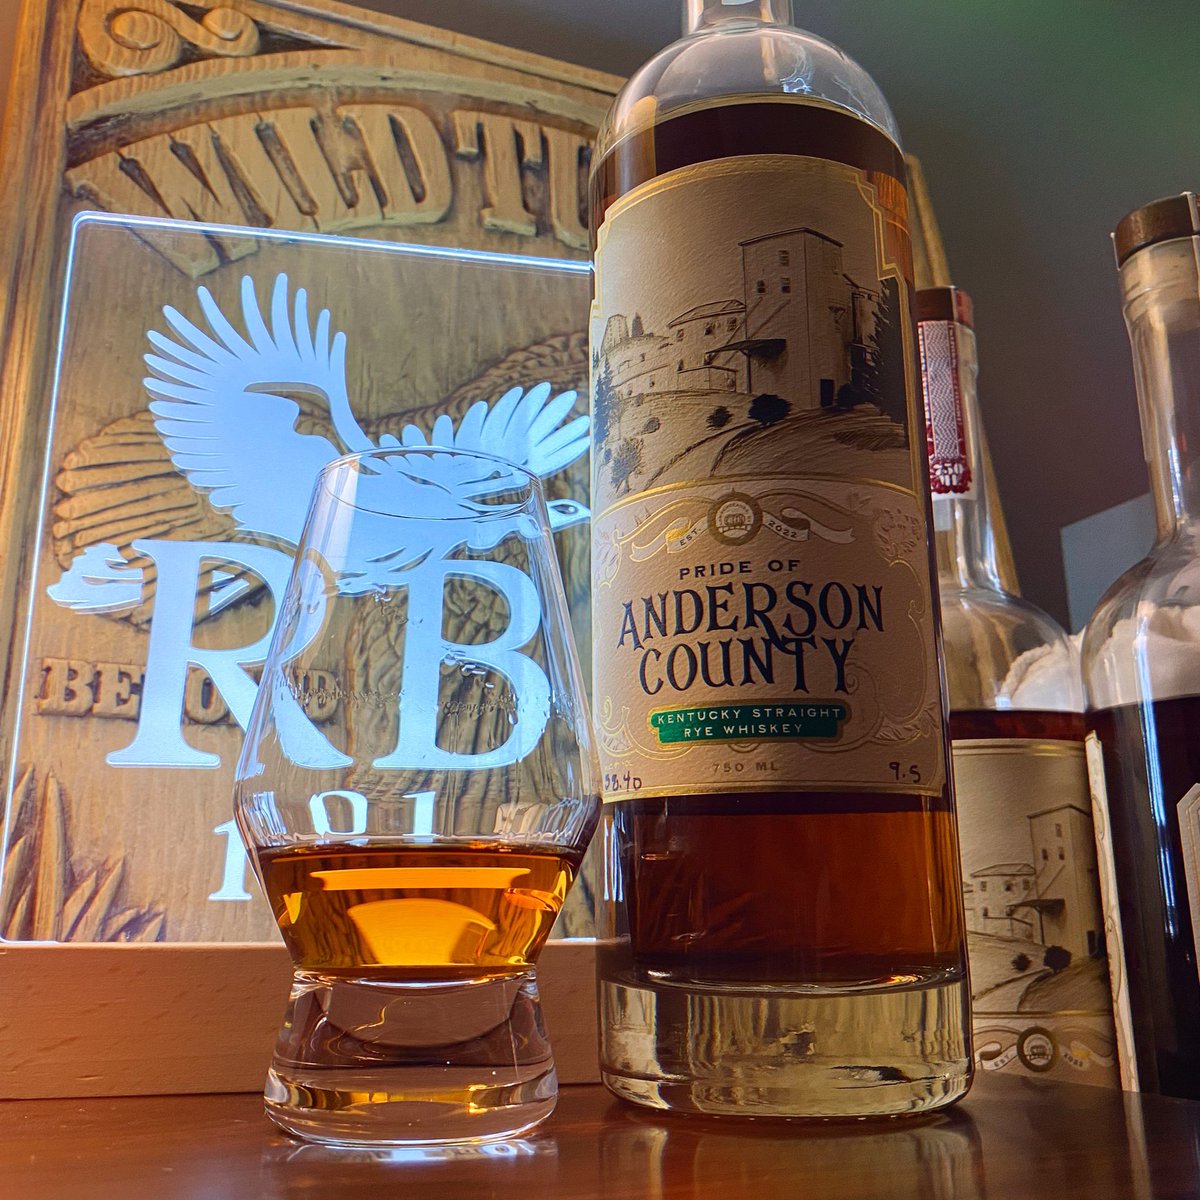 To date, the first and only Wild Turkey distilled single-barrel rye bottled at full barrel strength (aged 9.5 years in Tyrone’s rickhouse Q), and it could be yours via @BourbonCrusade’s 2023 charity auction. It’s a great cause, so please check it out! event.gives/crusaders23/it…